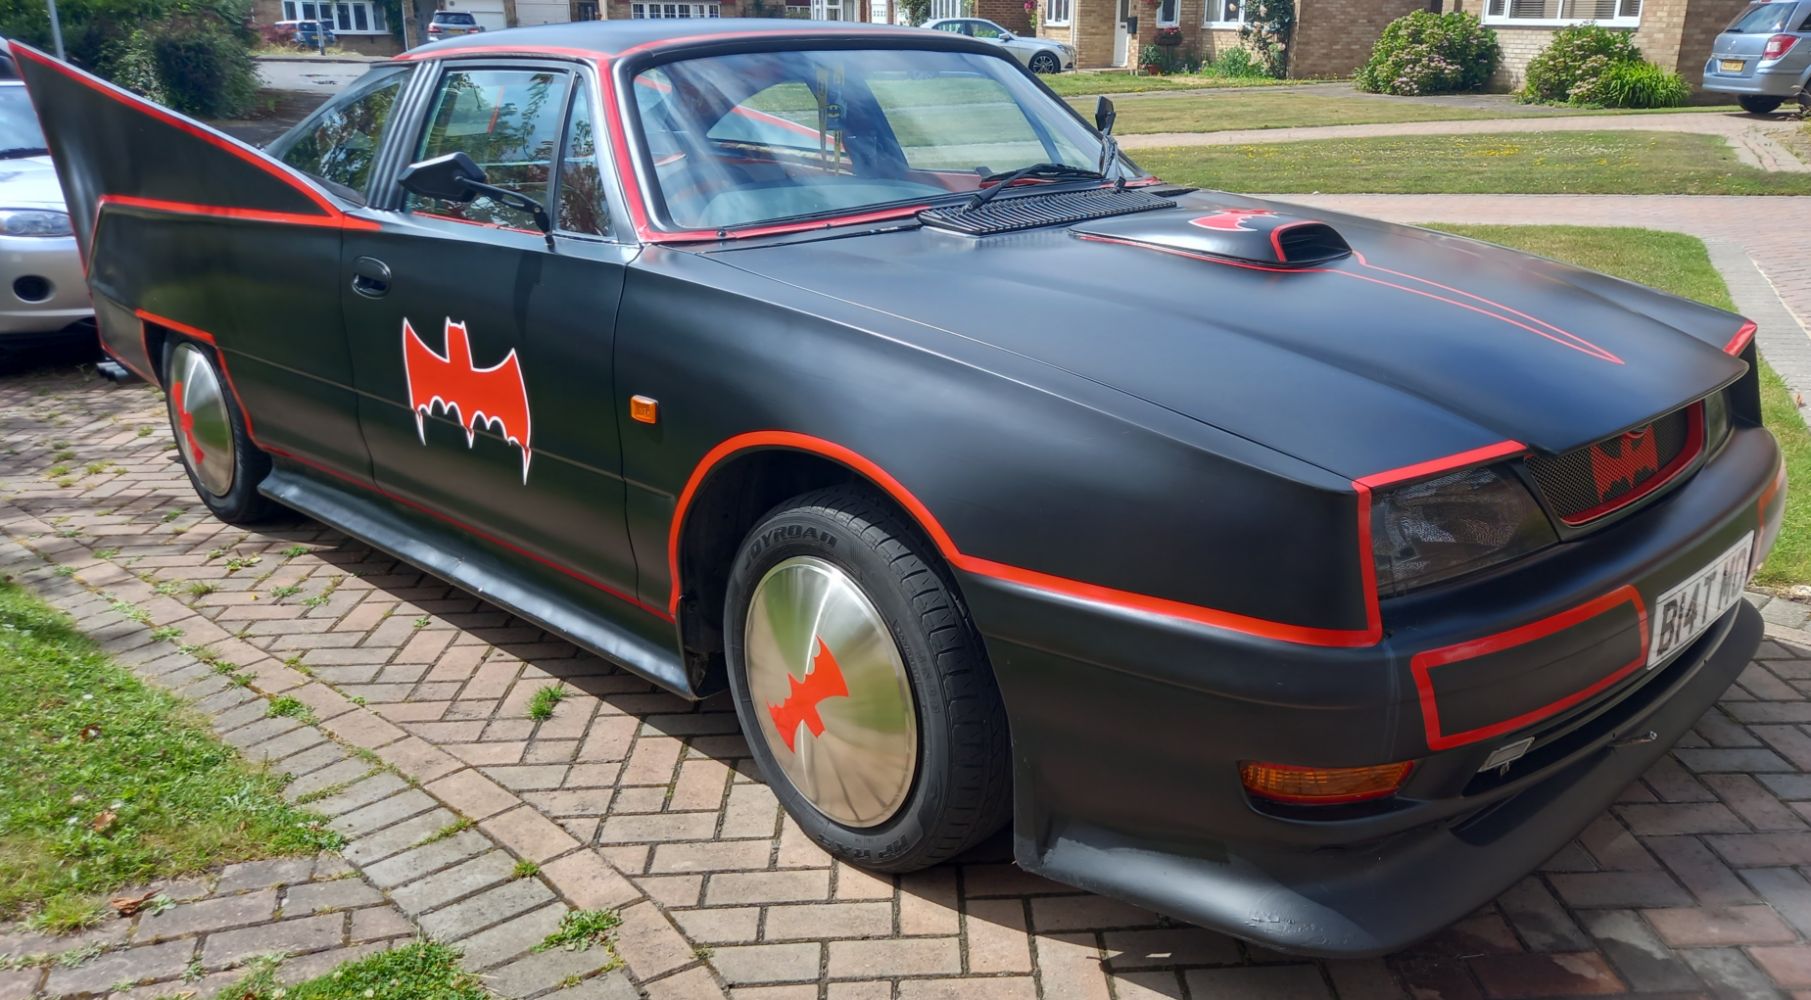 Antiques & Collectables - Including; Lifesize Batmobile, China, Stamps, Coins and Ephemera